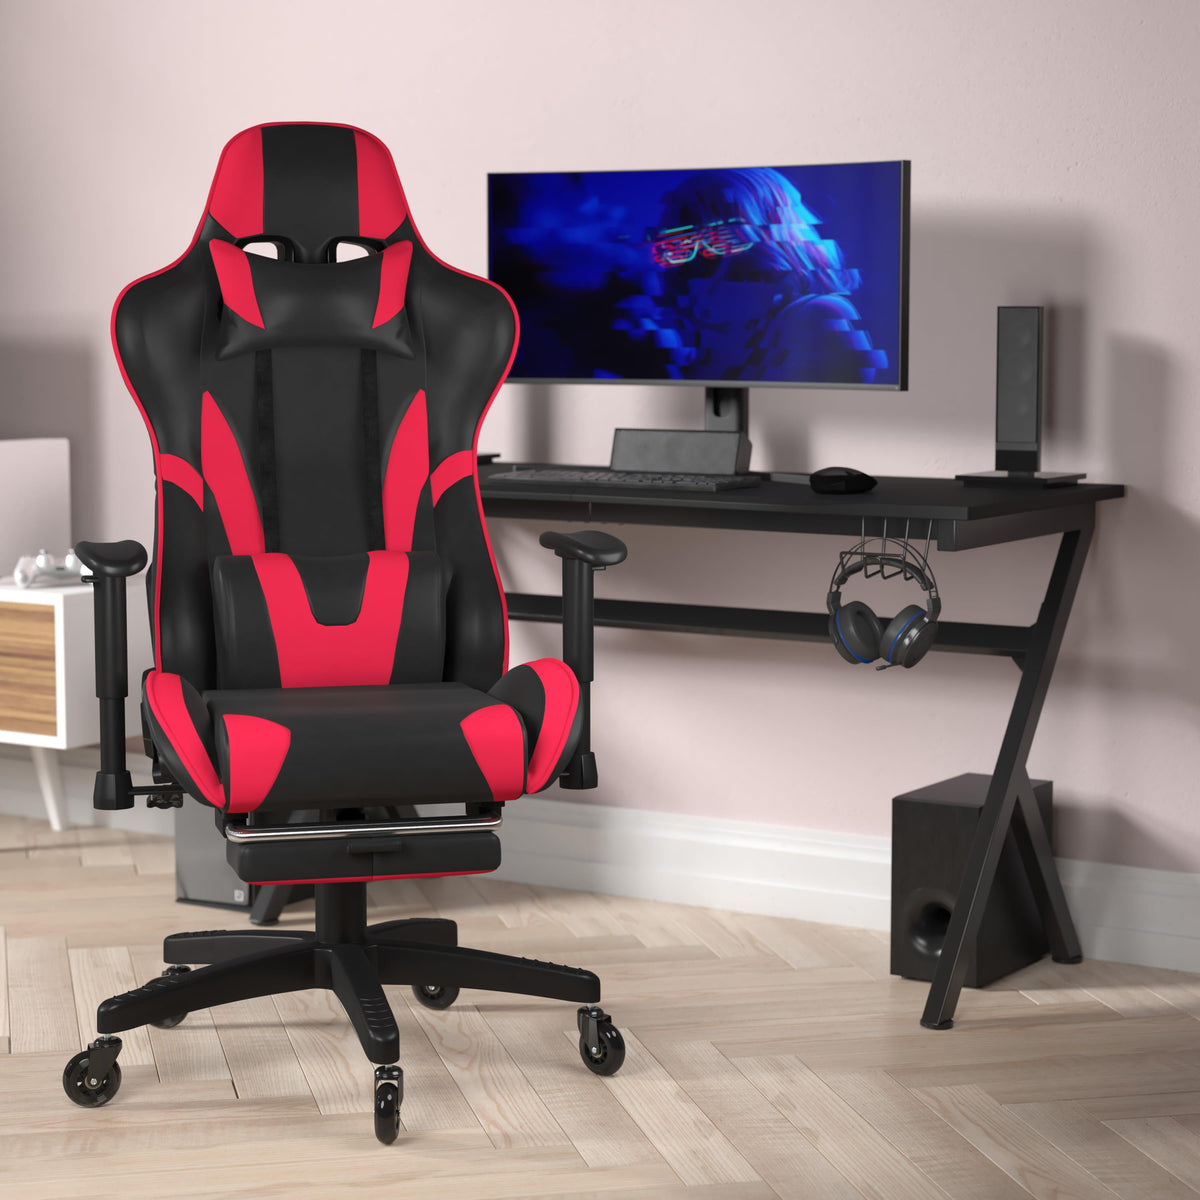 Red |#| Gaming Chair with Roller Wheels, Reclining Arms, Footrest-Red LeatherSoft